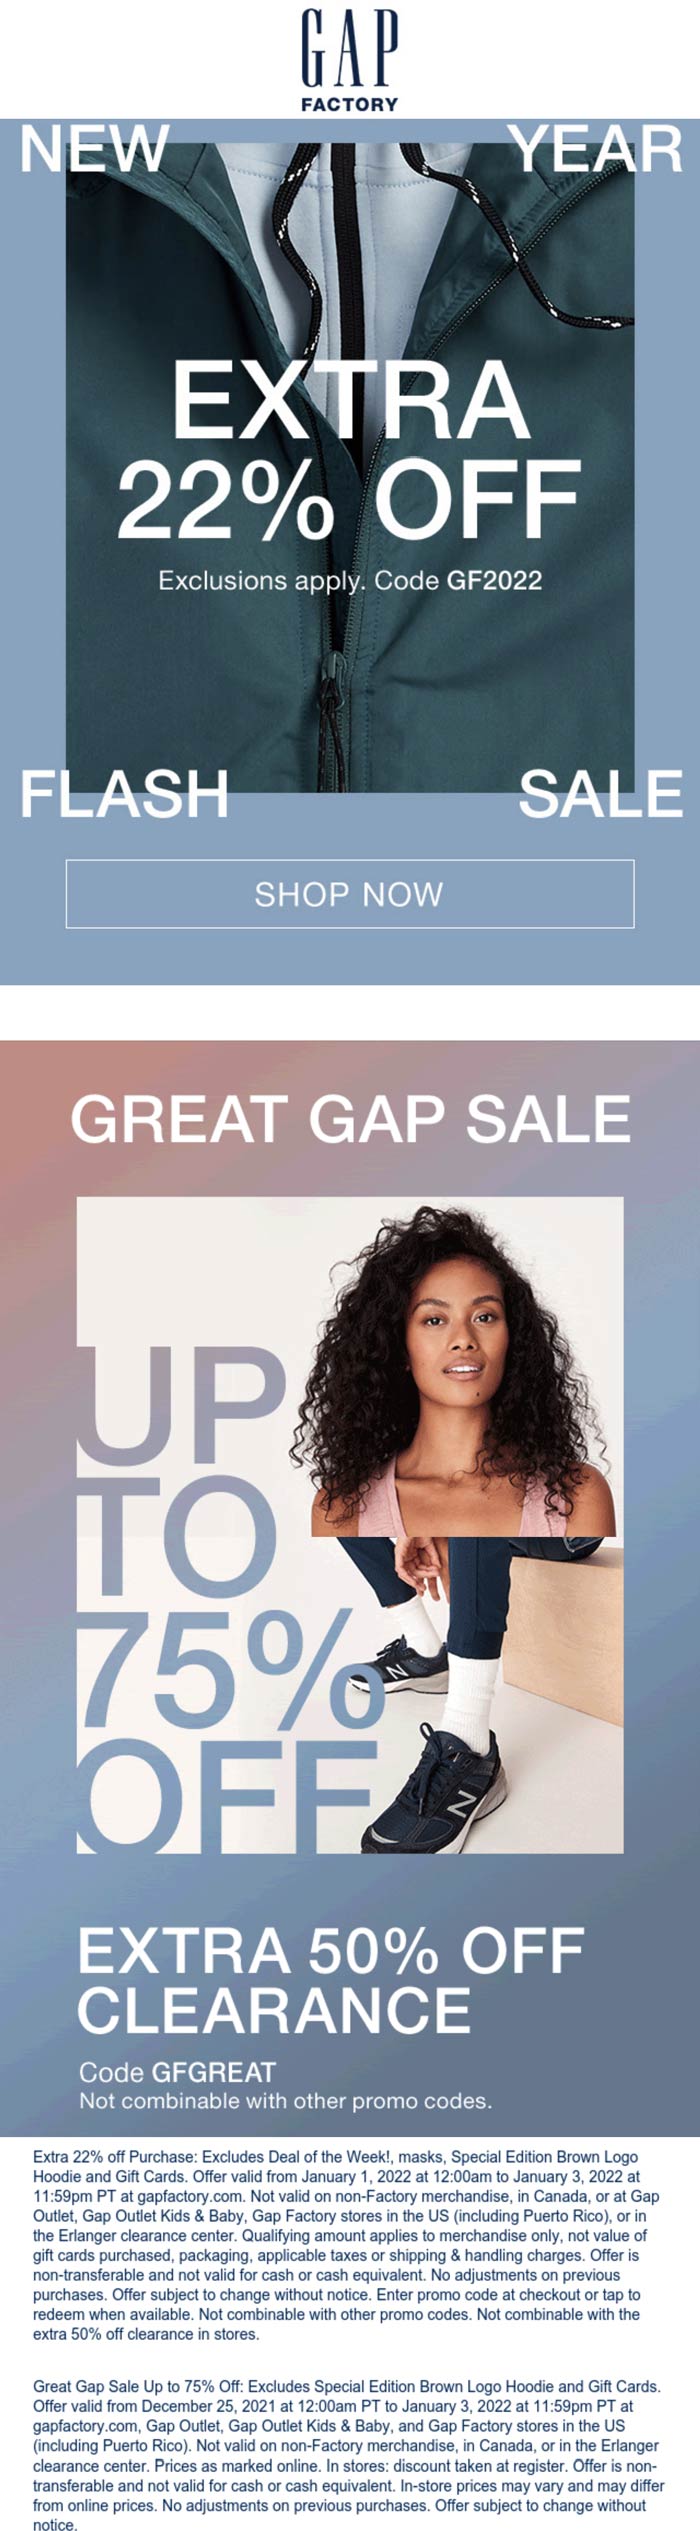 Gap Factory stores Coupon  Extra 22% off online today at Gap Factory via promo code GF2022 #gapfactory 